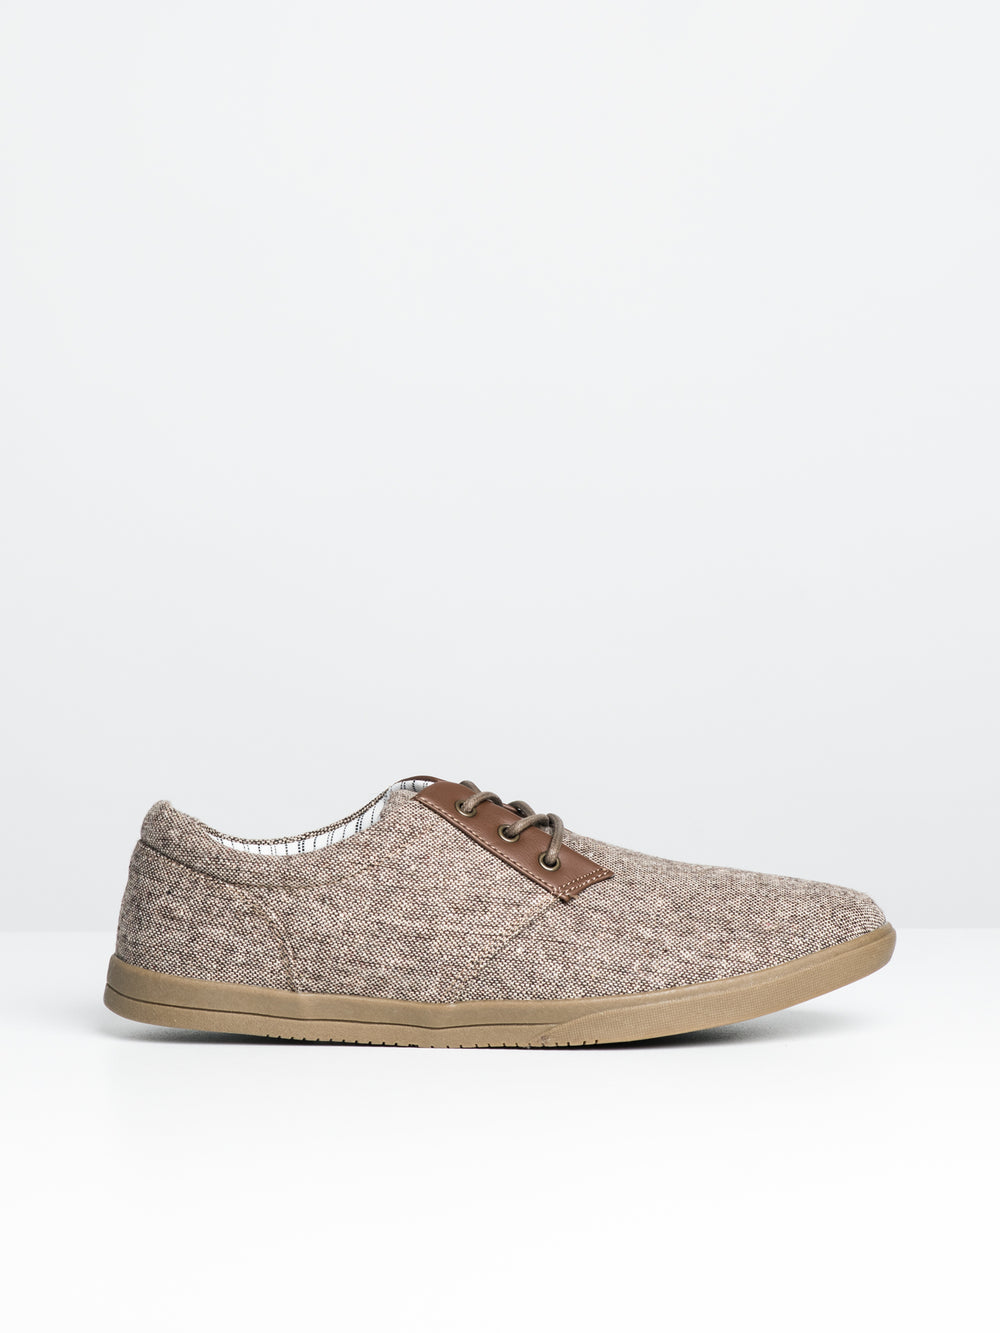 MENS RILEY SNEAKER - CLEARANCE